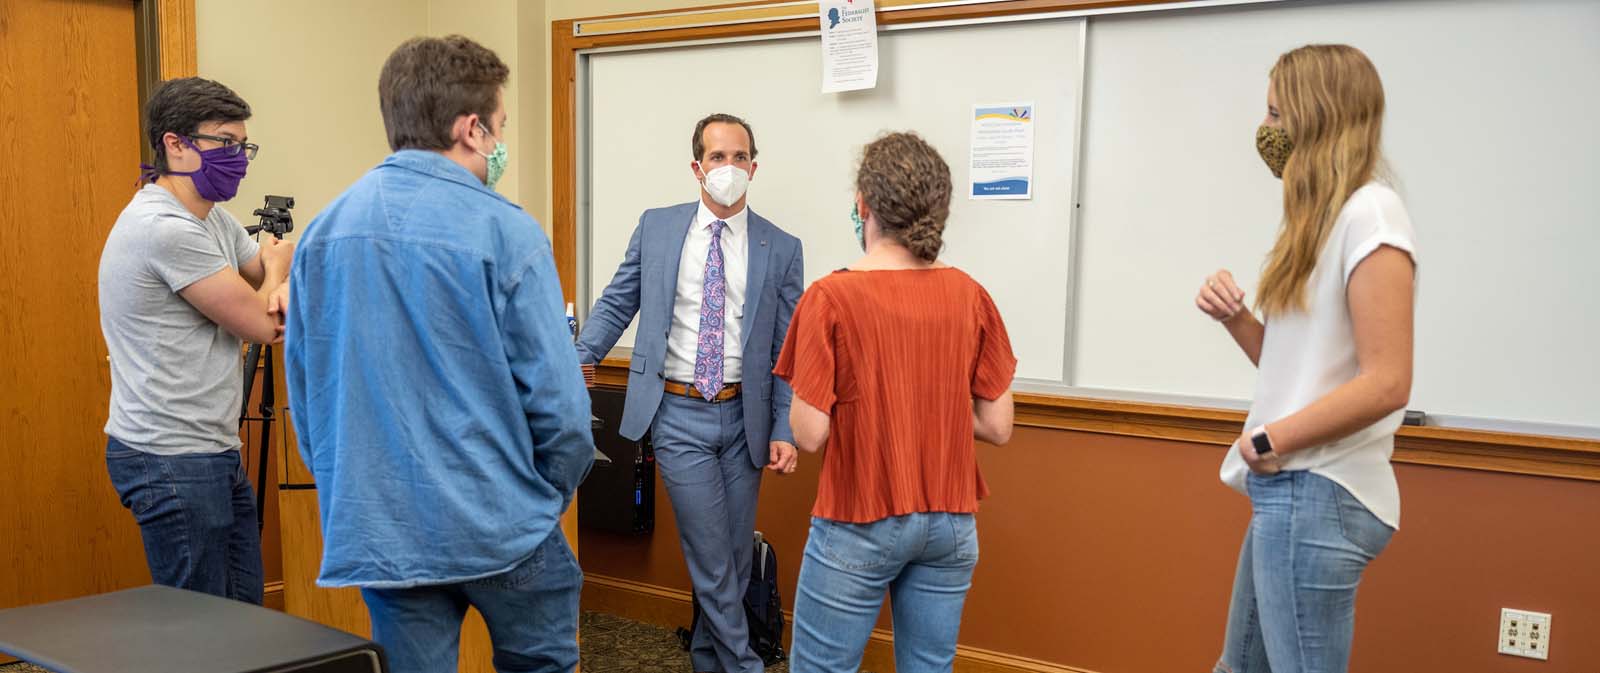 Attorney and co-teacher of the Notre Dame Exoneration Justice Project, Elliot Slosar, chats with law students after class.